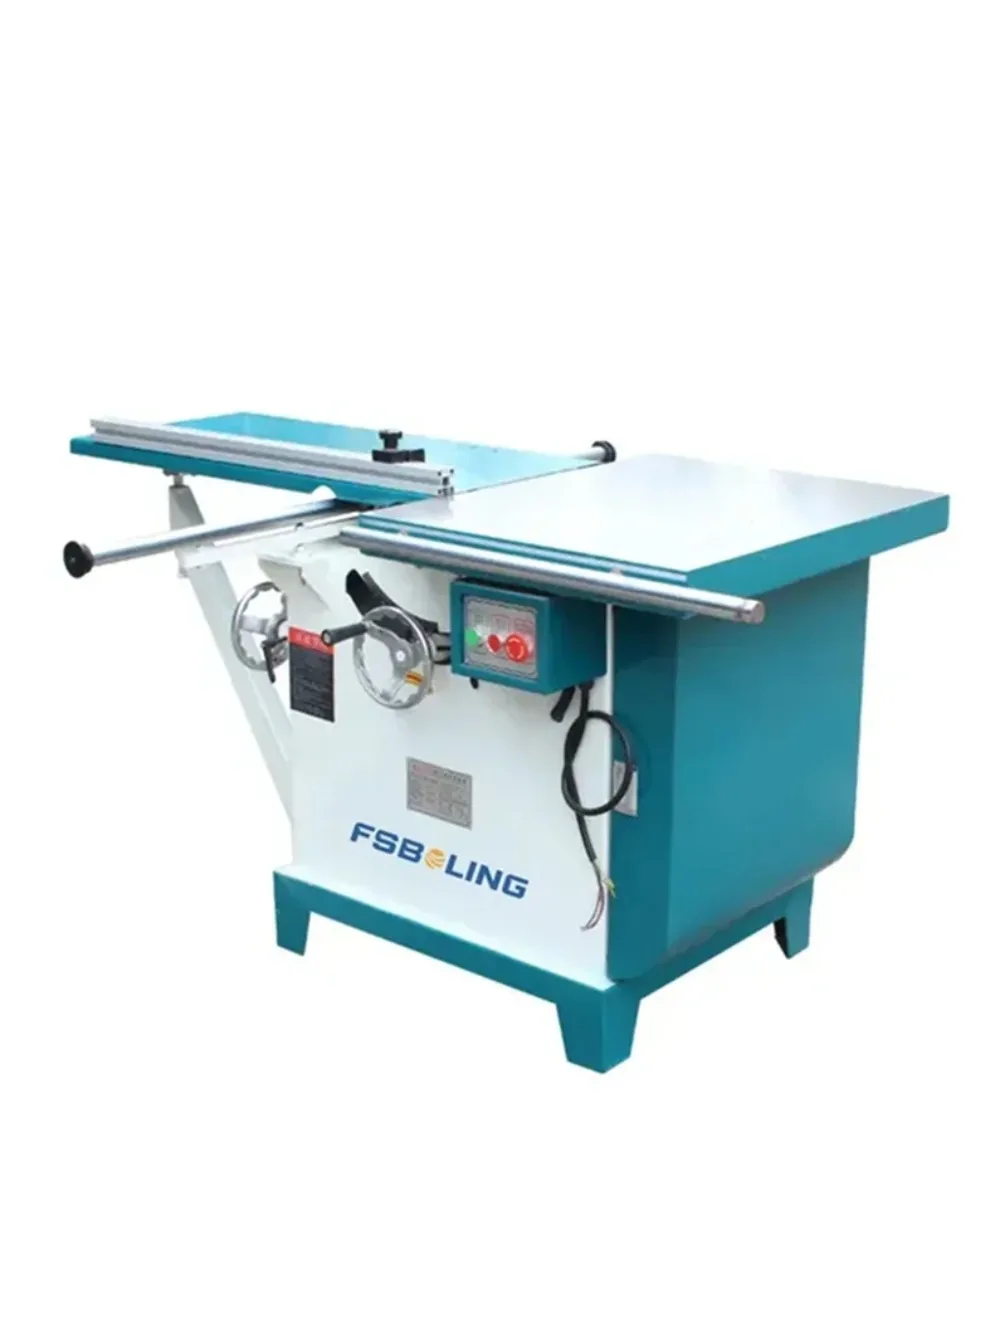 

Industrial Grade High Quality High Precision Portable Wood Cutting Sliding Bench Saw Machine For Woodworking